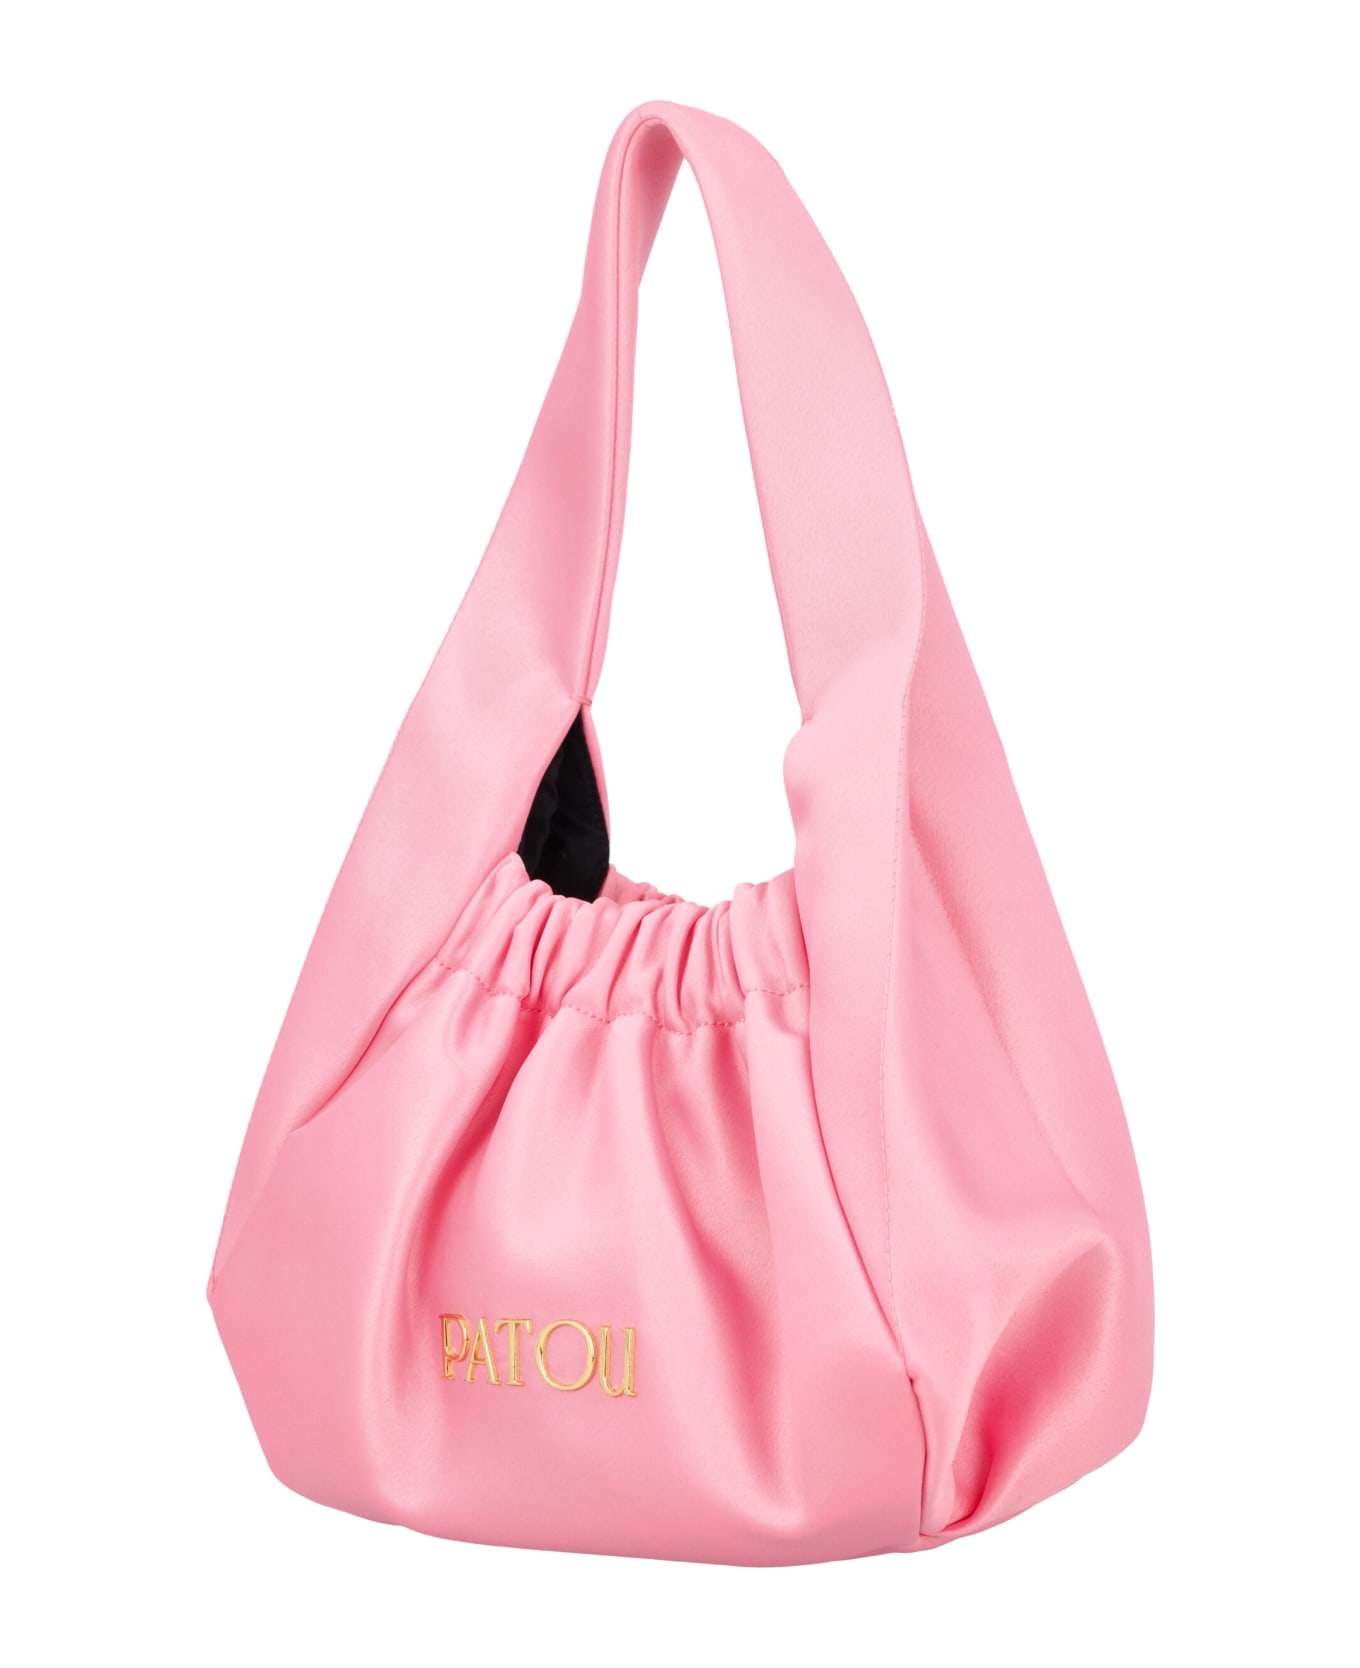 Patou Le Biscuit Bag - PINK トートバッグ